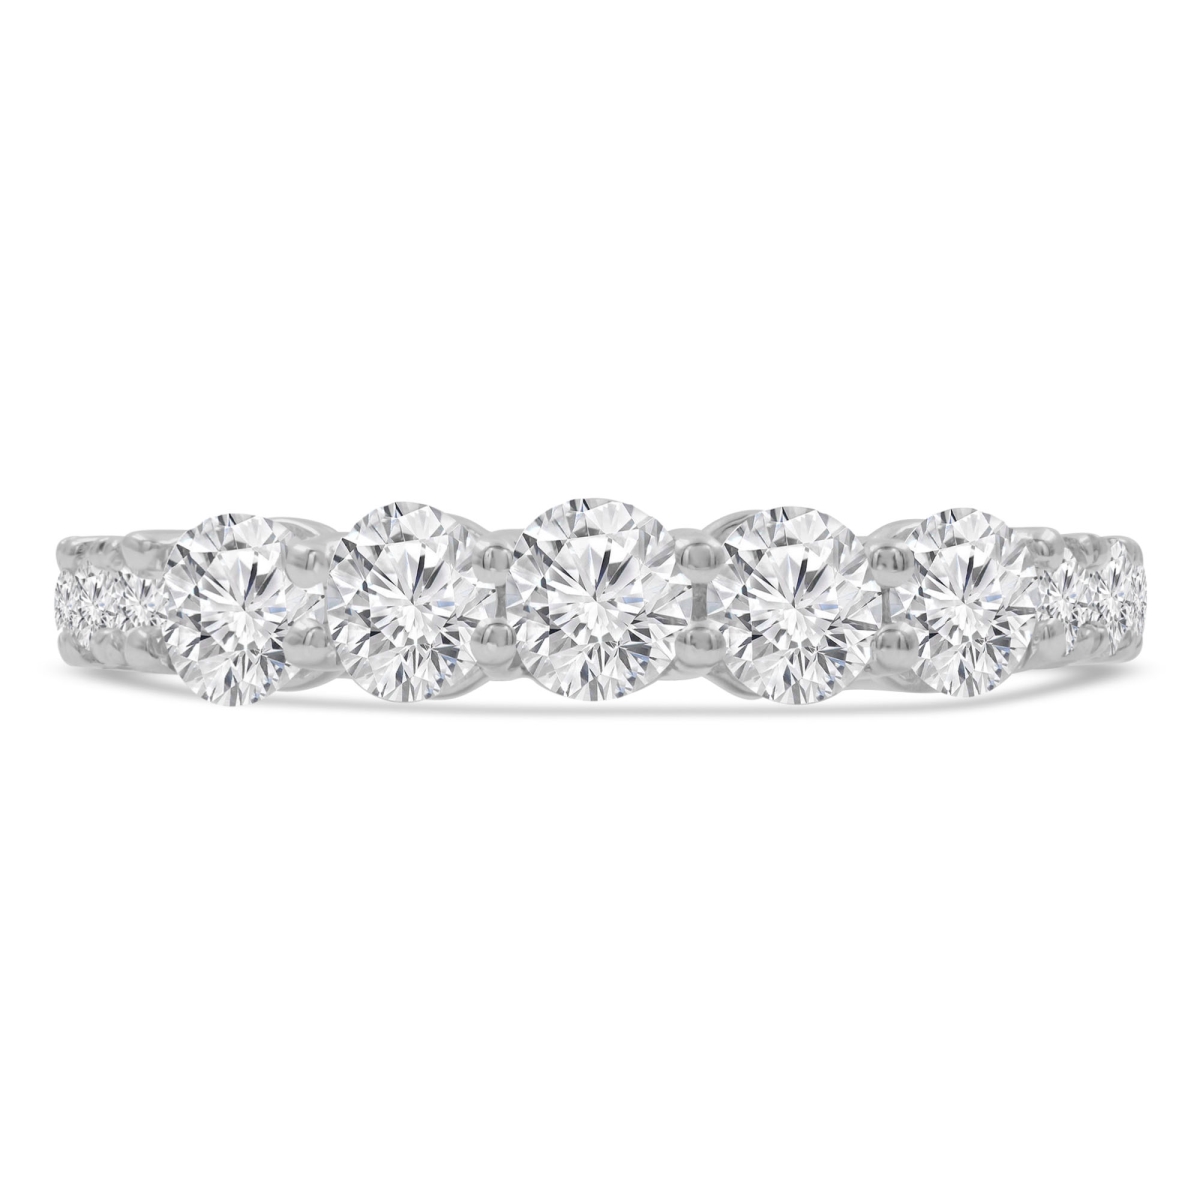 Picture of Majesty Diamonds MD210372-3.5 1.4 CTW Round Diamond Five-Stone Ring with Accents in 14K White Gold - Size 3.5